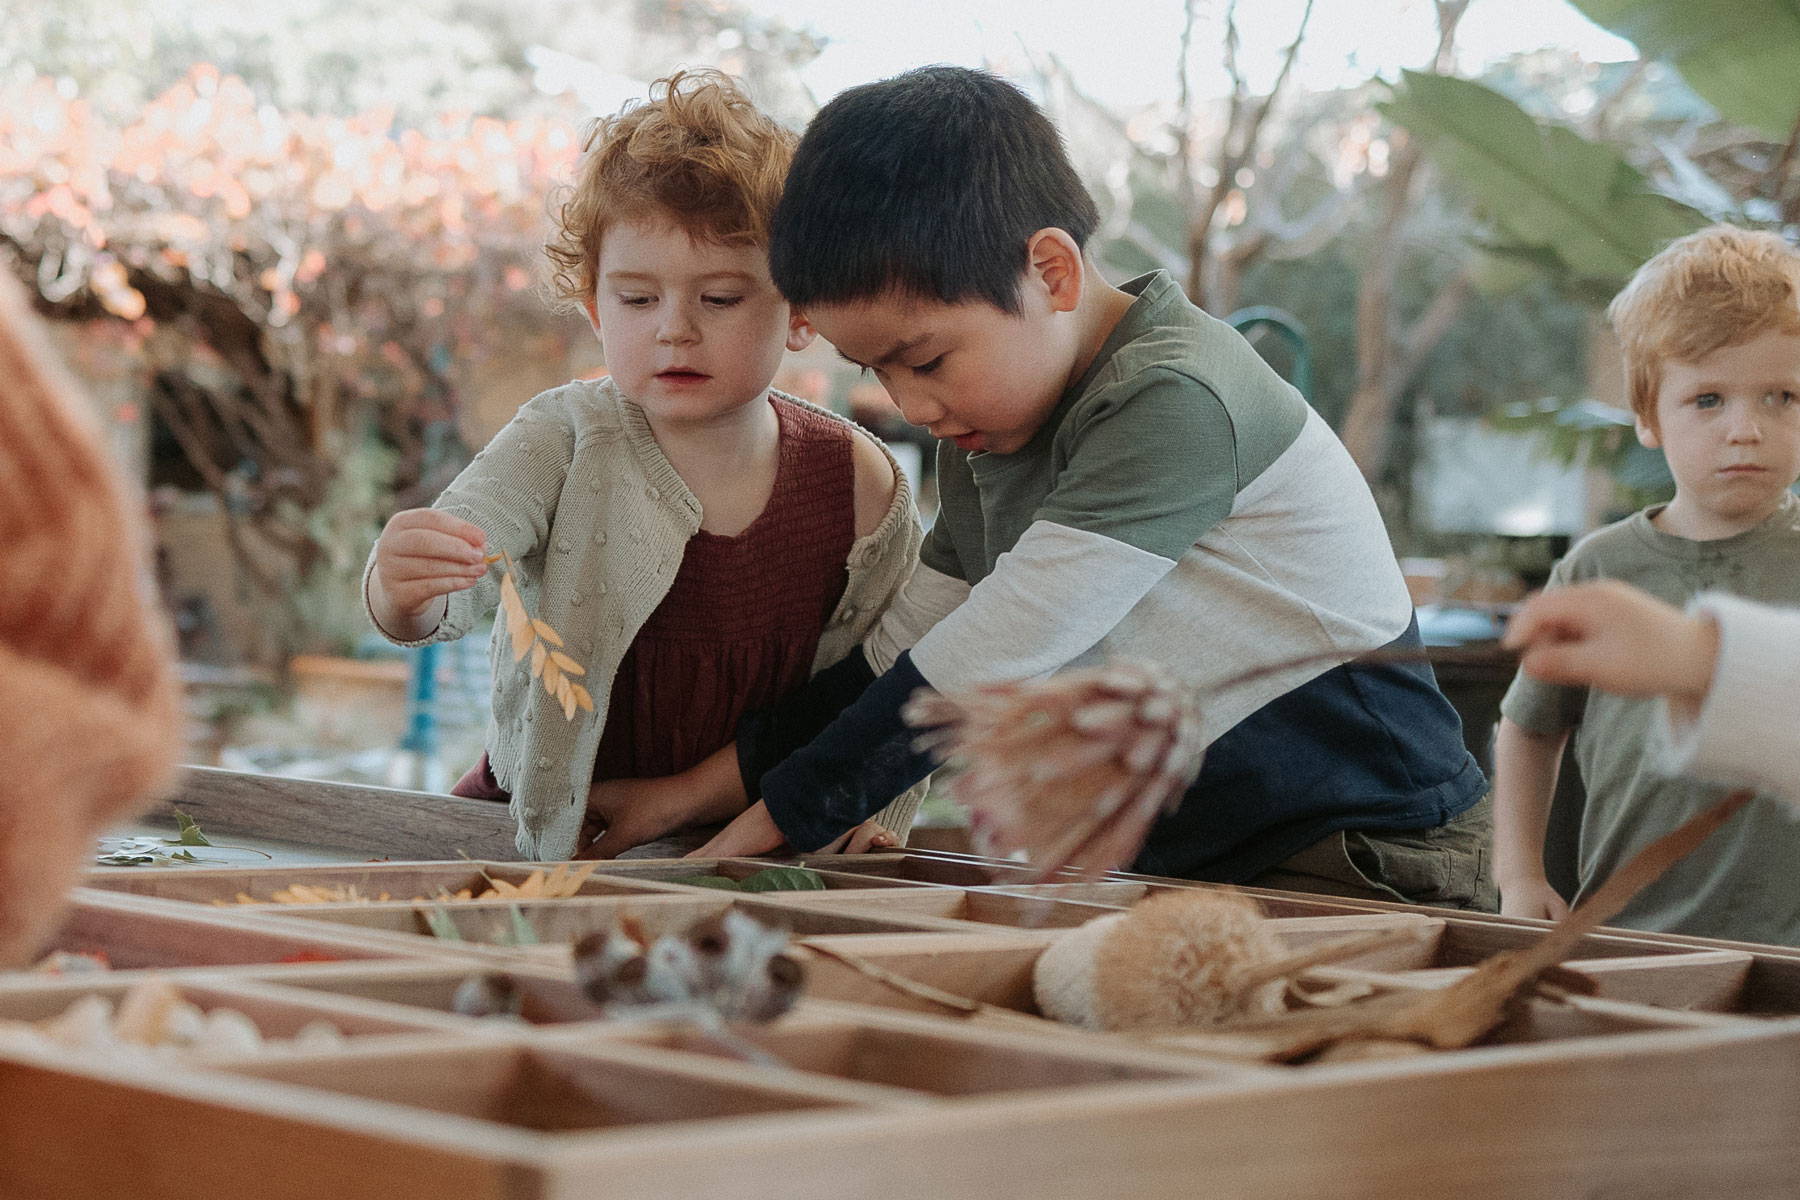 Children Engaging with Nature's Bounty on the Exploration Table